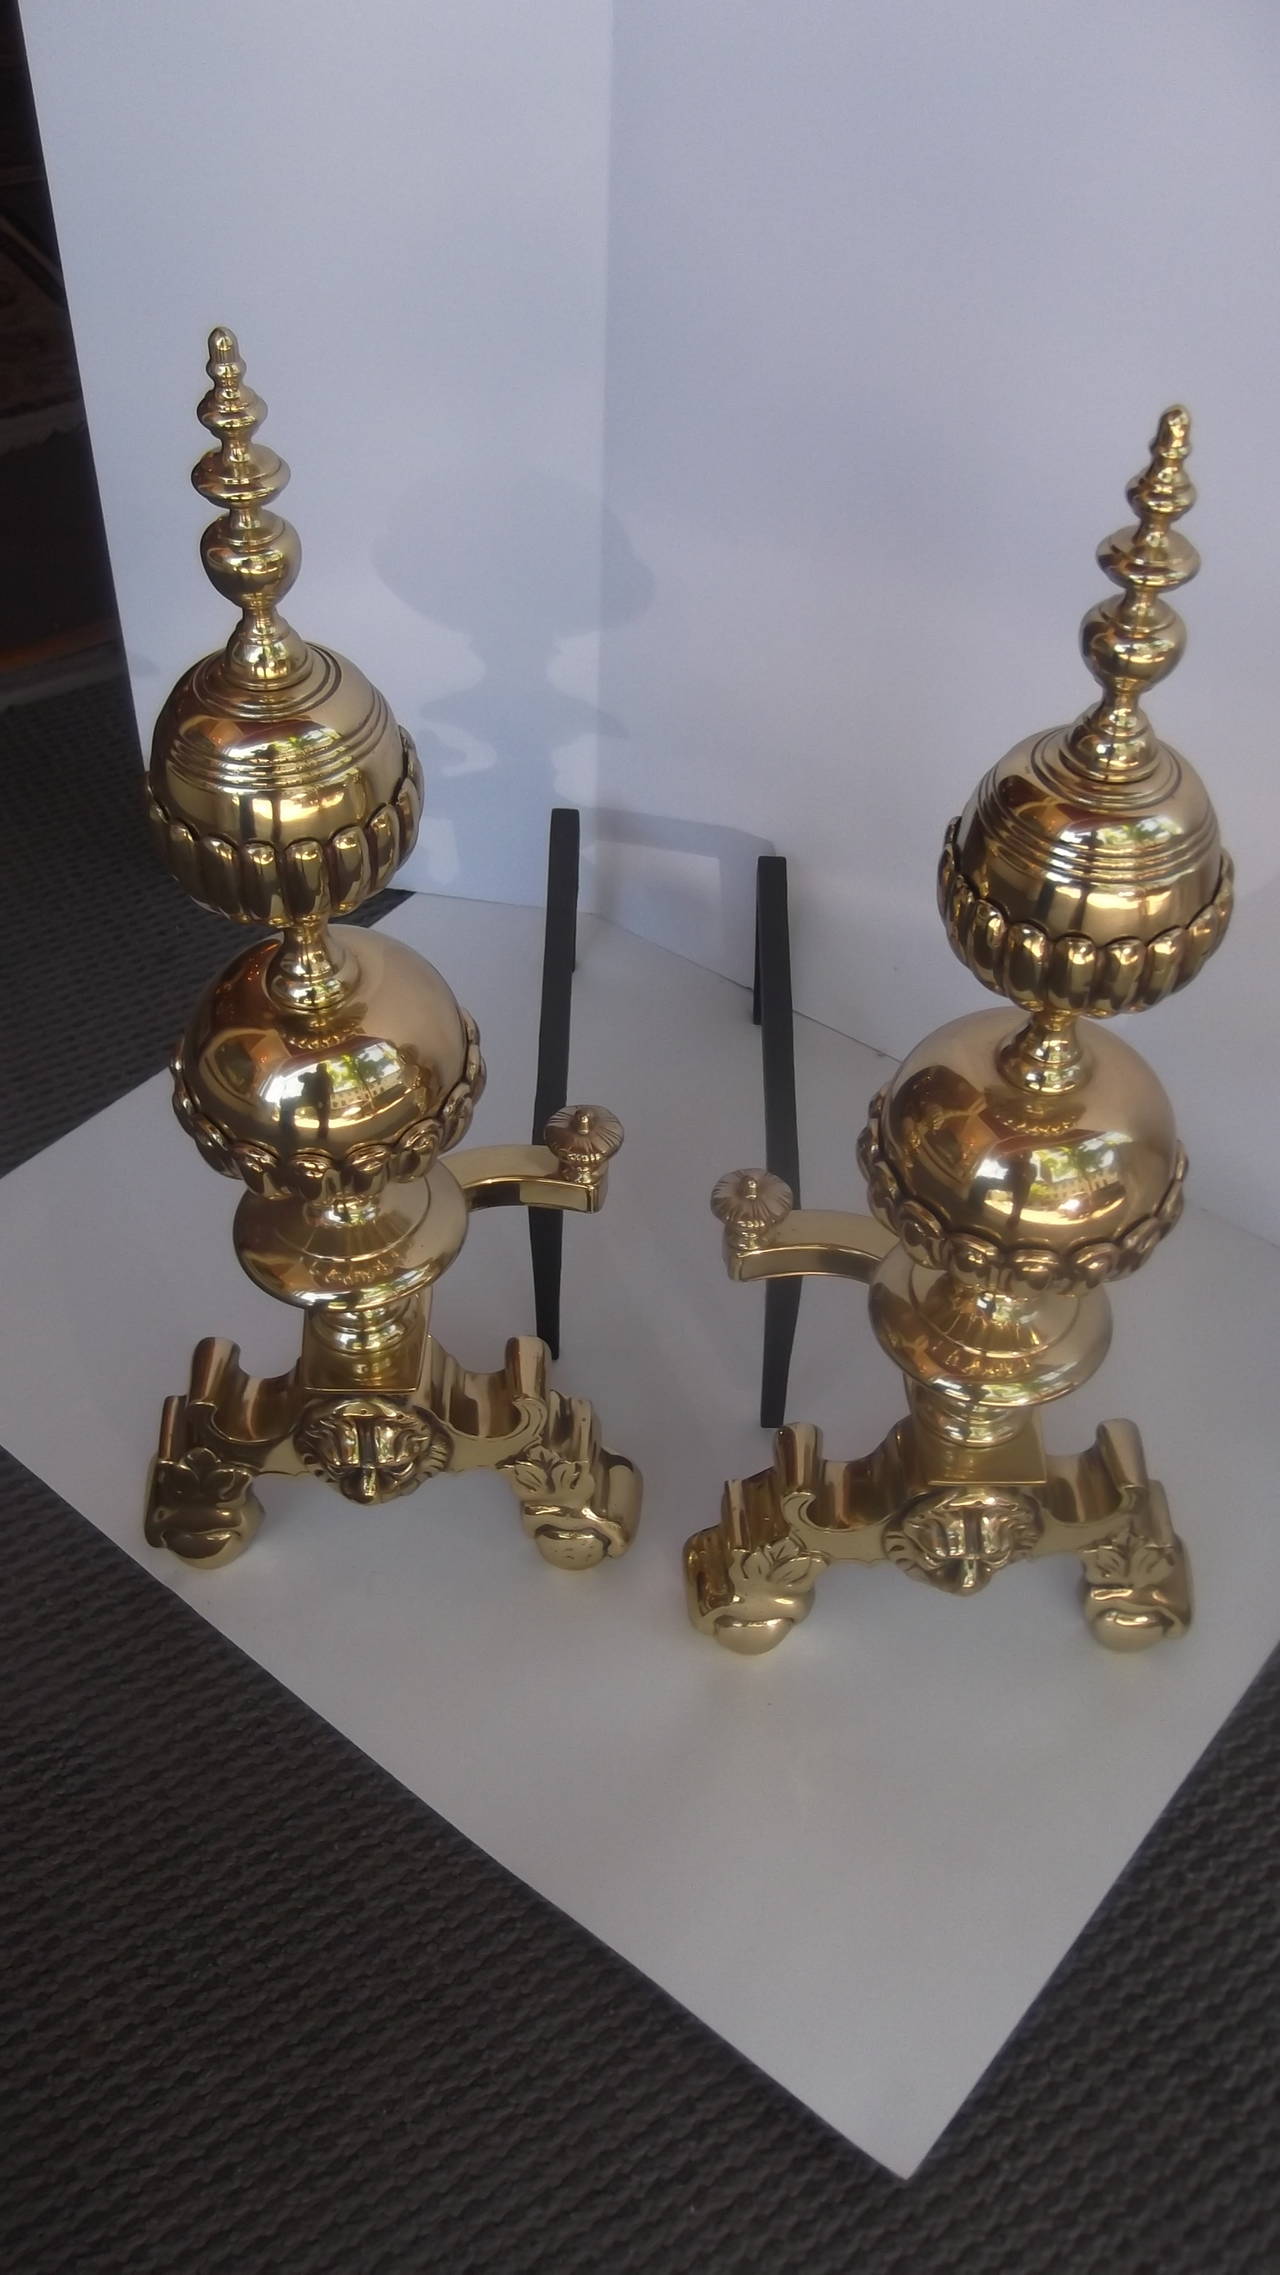 Cast Pair of Solid Brass Andirons, circa 1900